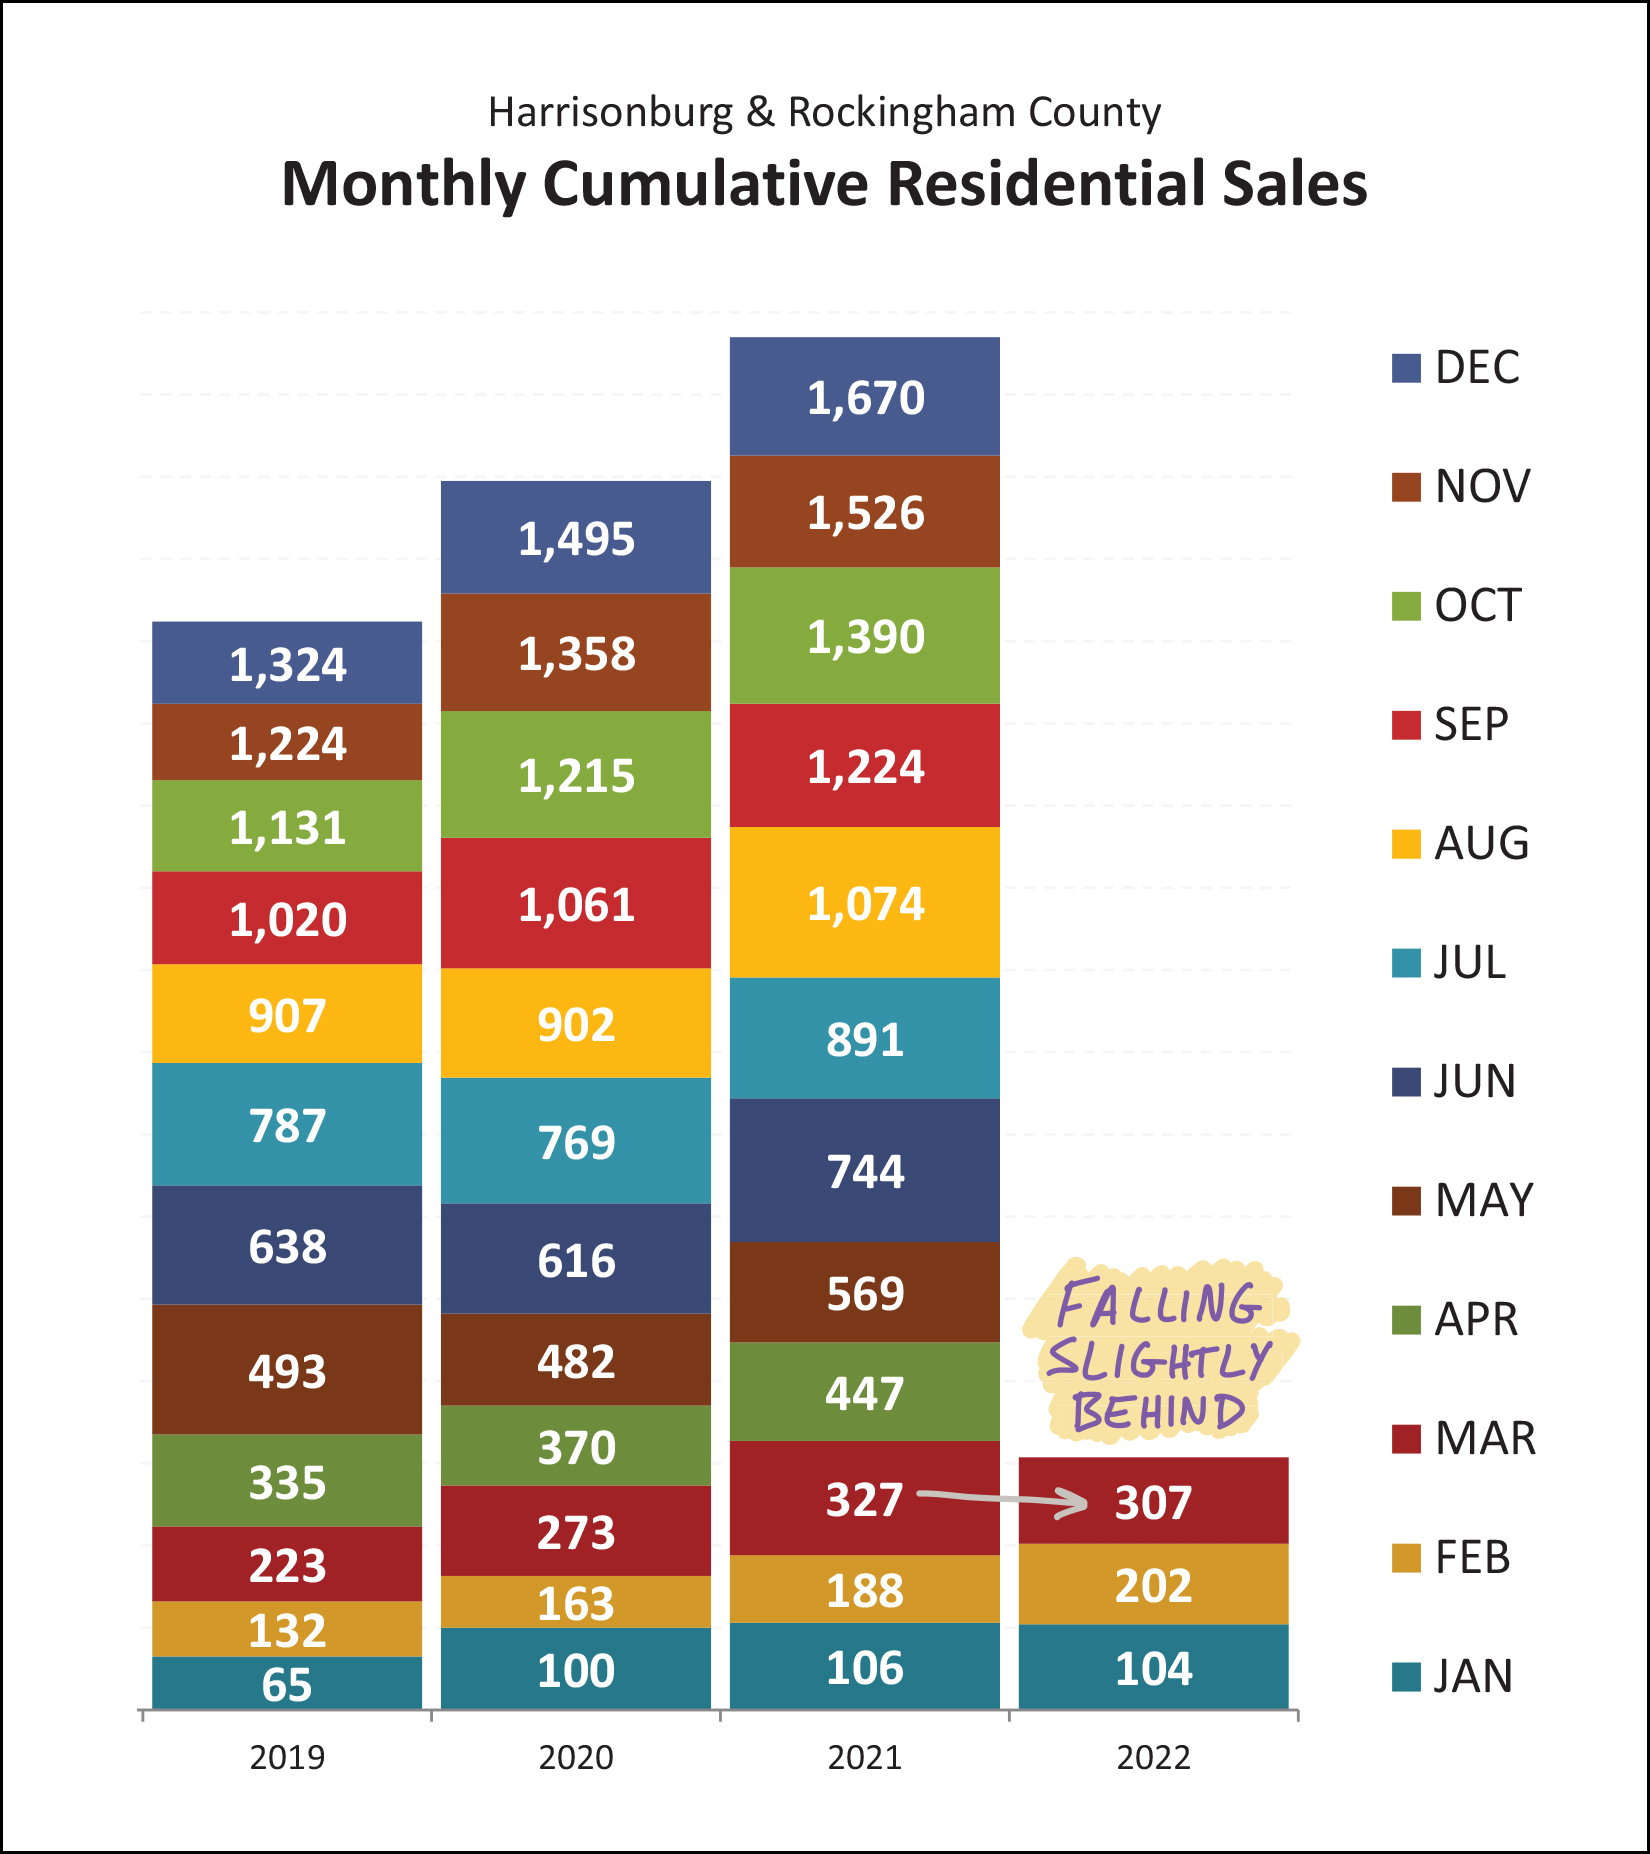 Annual Home Sales